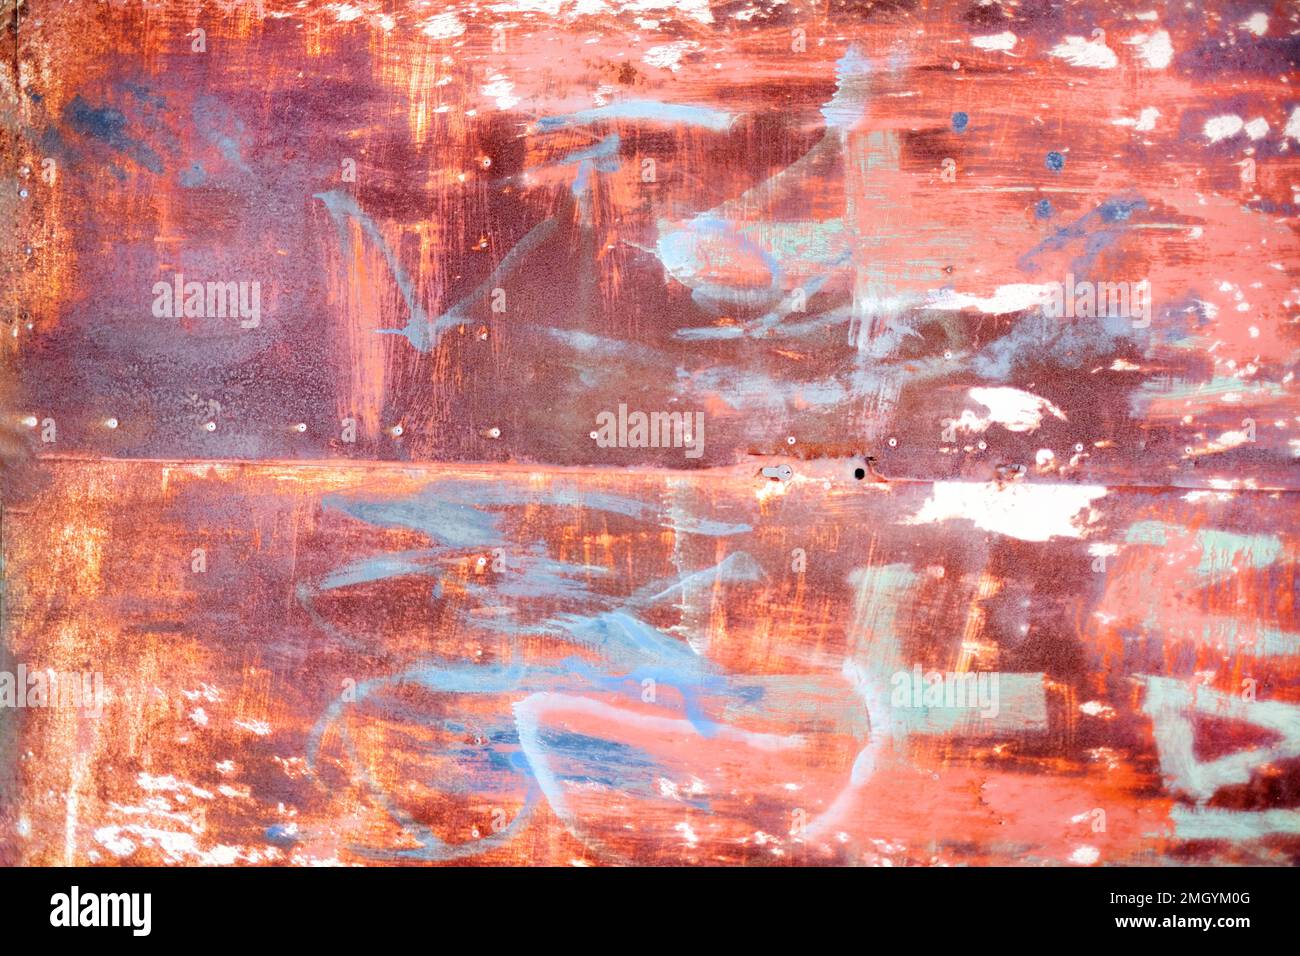 A background image of a rusty metal sheet. The sheet is worn and has the remnants of paint with an overall brown colour Stock Photo